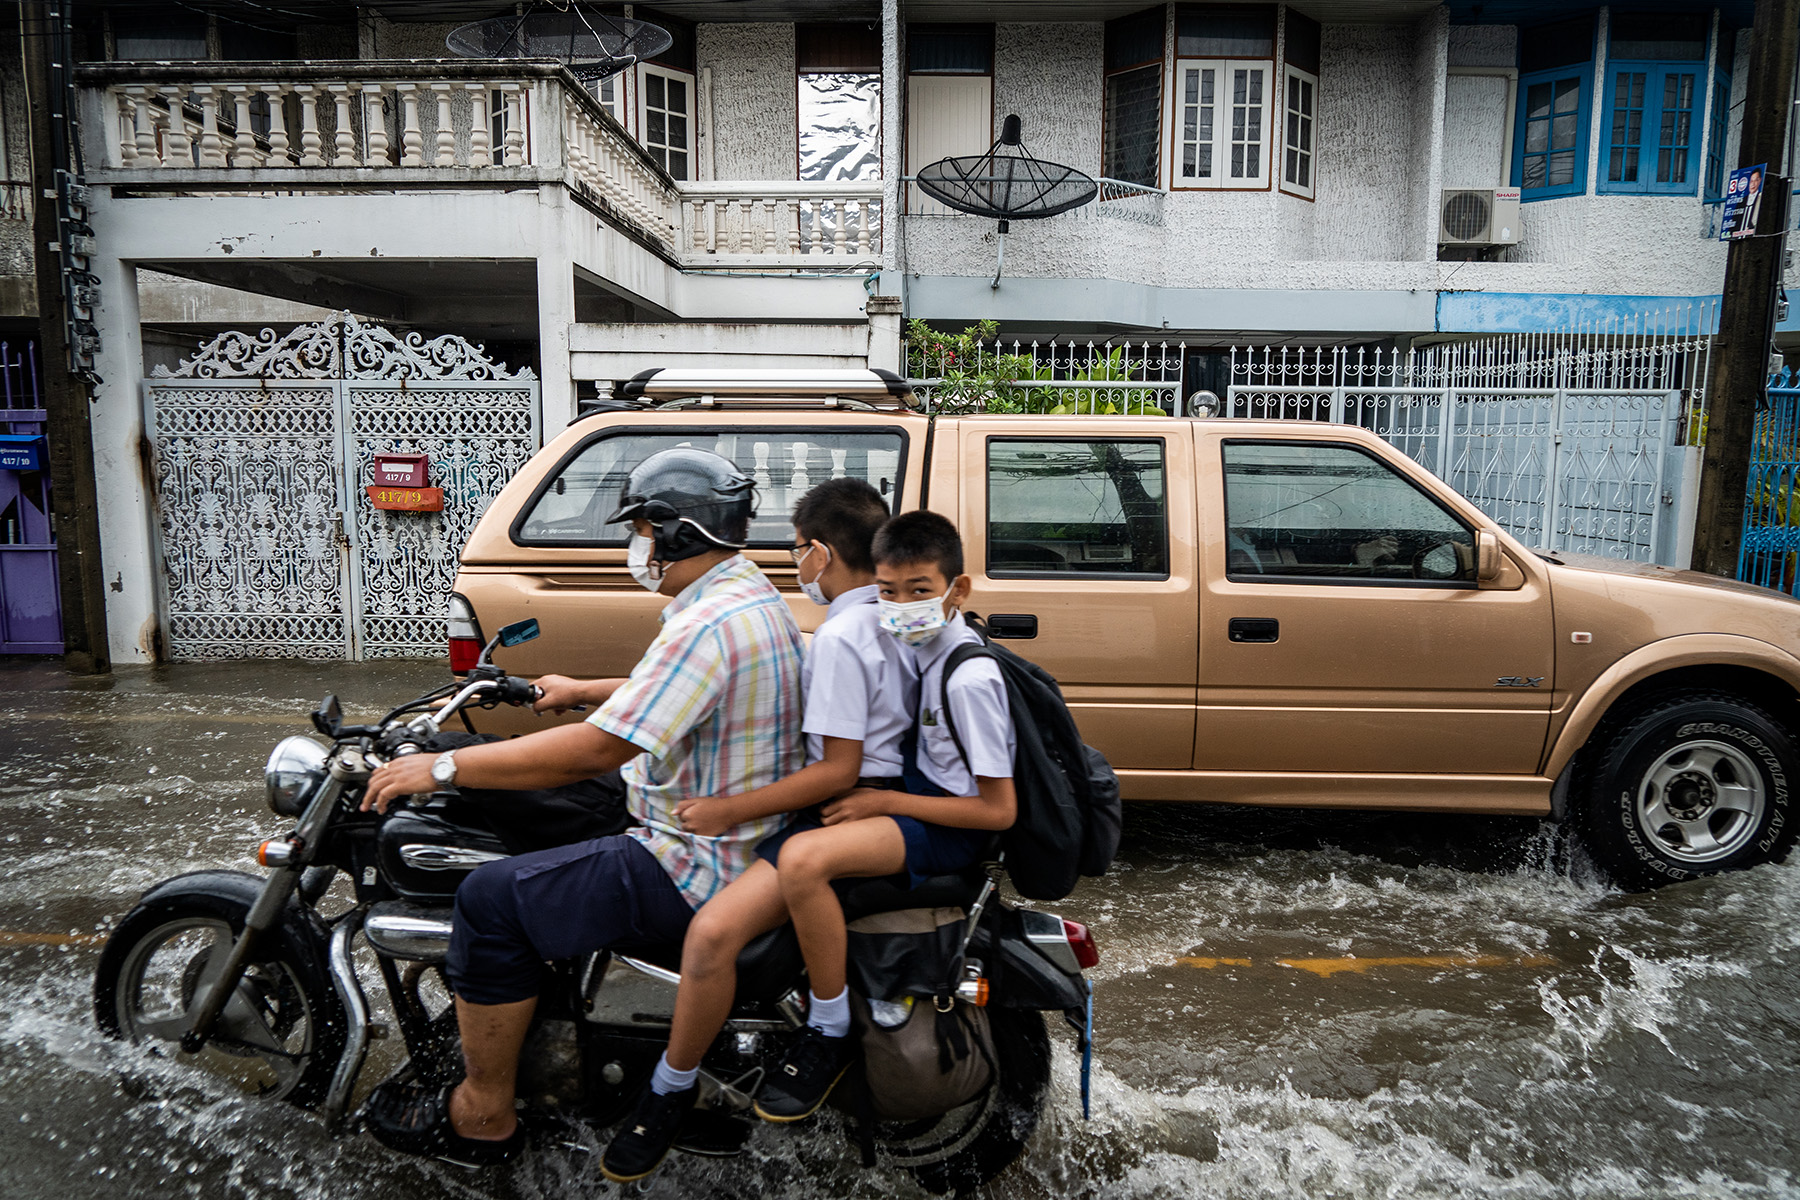 Teenage boys commute to school on a motorcycle during heavy flooding in Bangkok.

